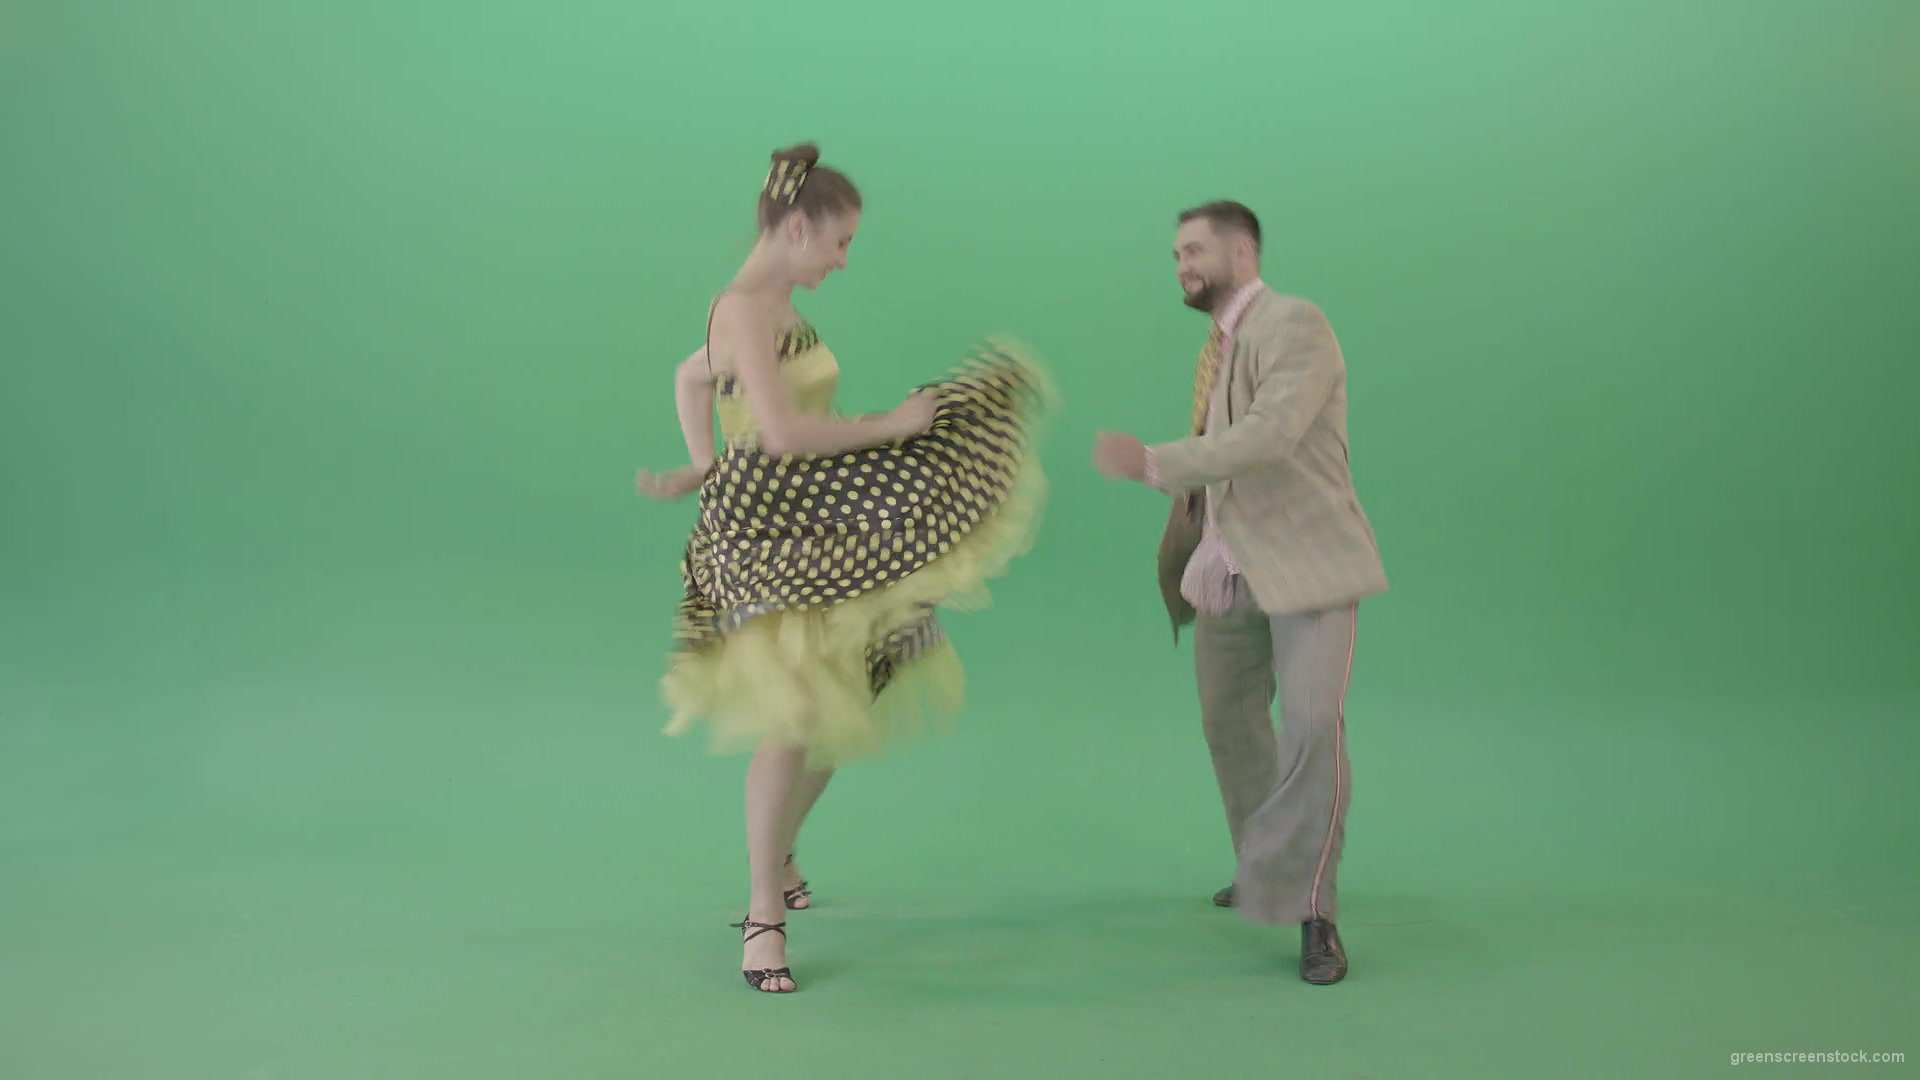 Boy-and-Girl-dancing-Boogie-woogie-and-rockandroll-isolated-on-Green-Screen-4K-Video-Footage-1920_005 Green Screen Stock